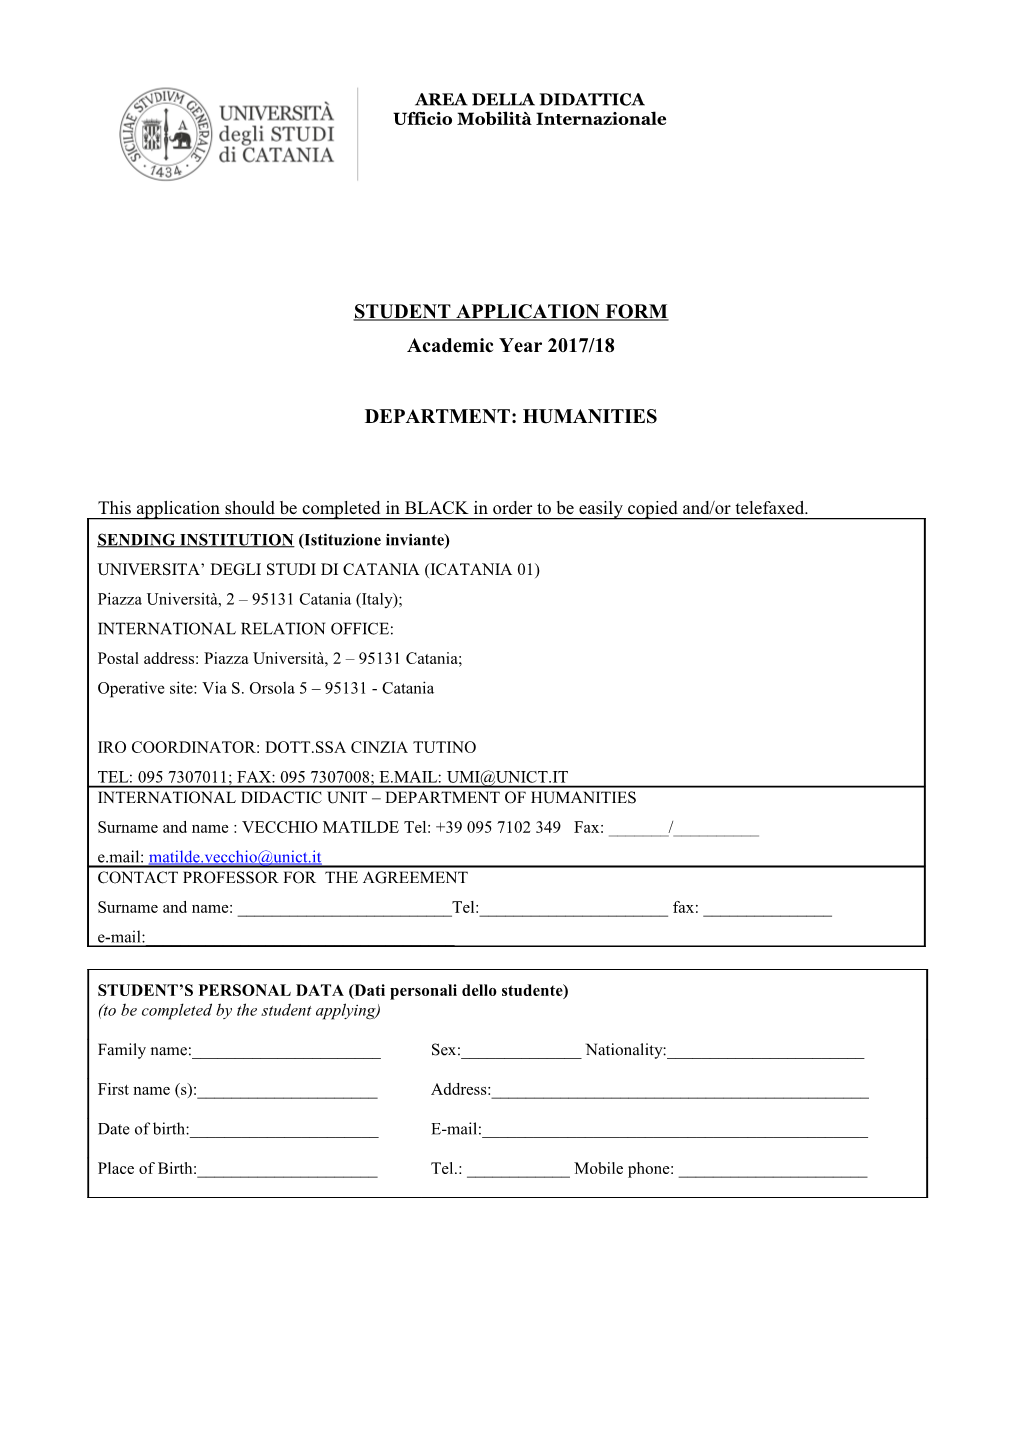 Student Application Form s1